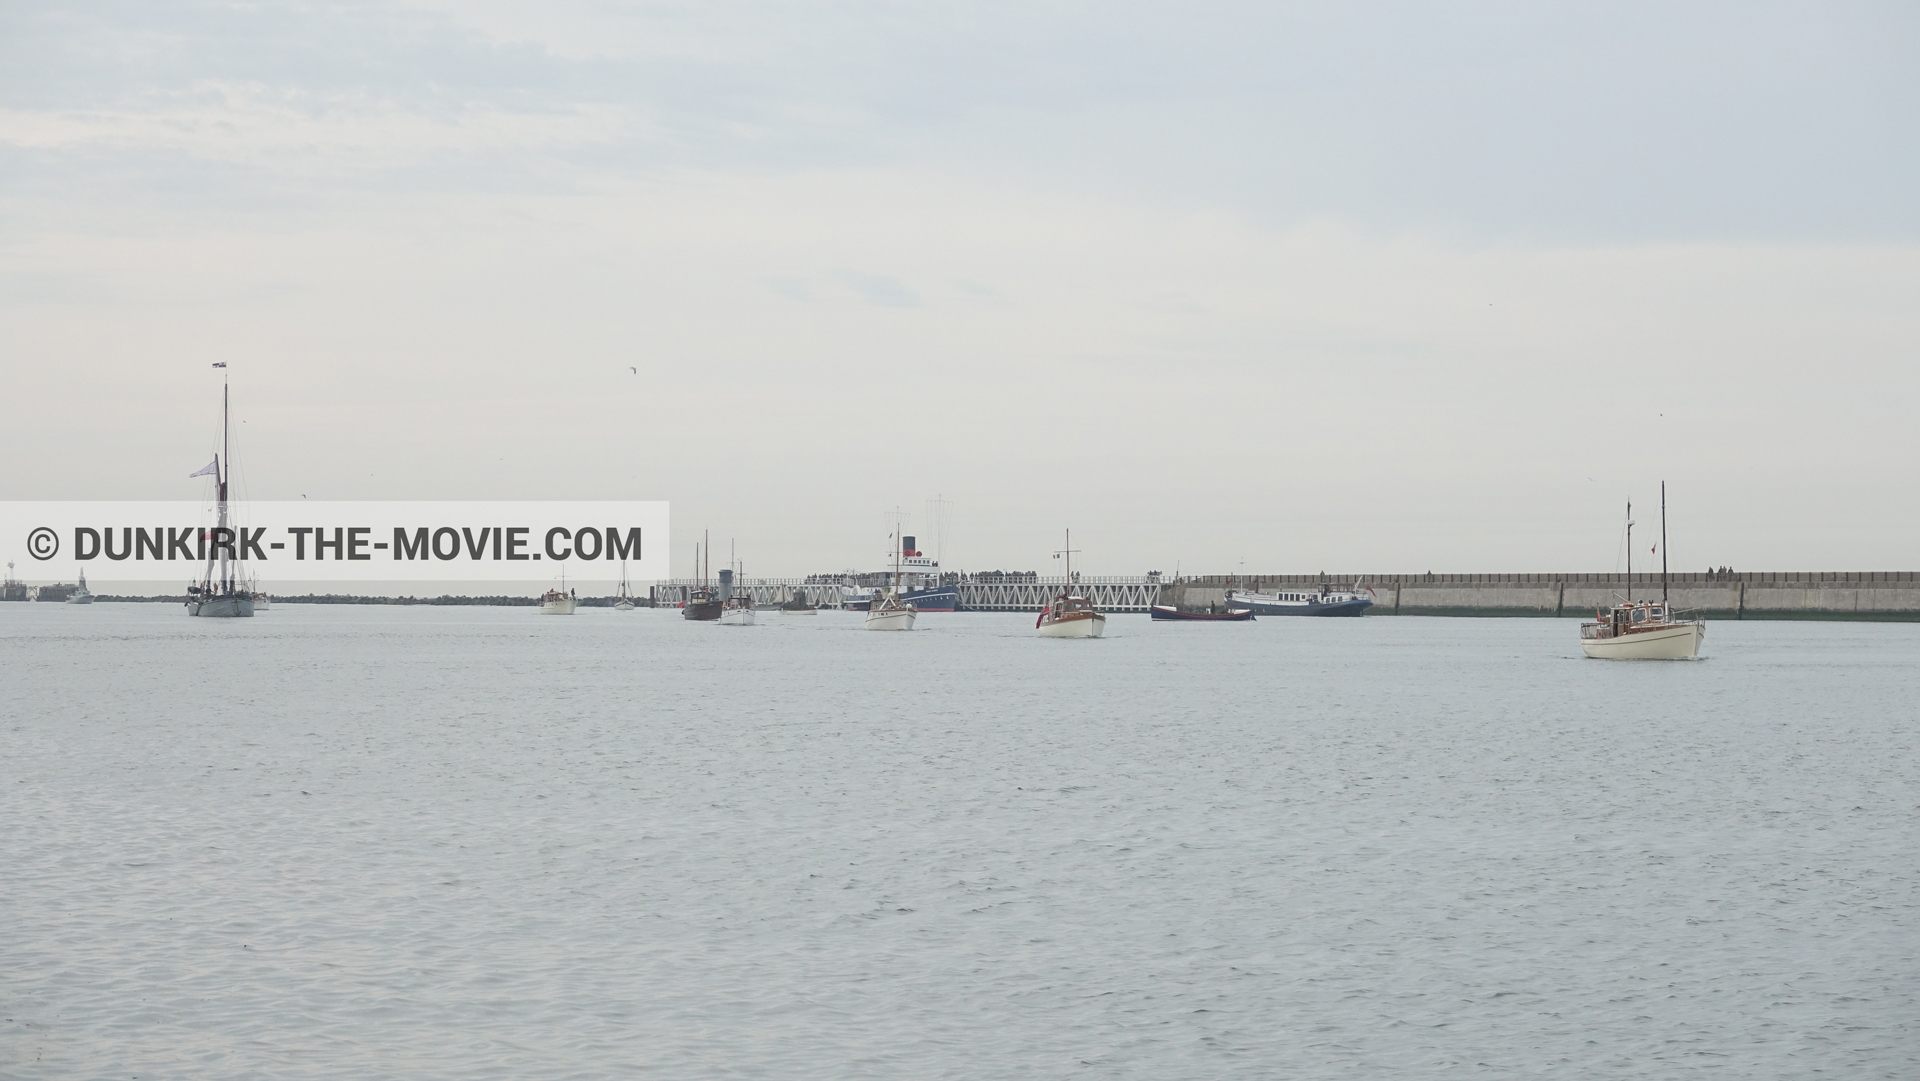 Picture with boat, EST pier, Xylonite, Princess Elizabeth,  from behind the scene of the Dunkirk movie by Nolan